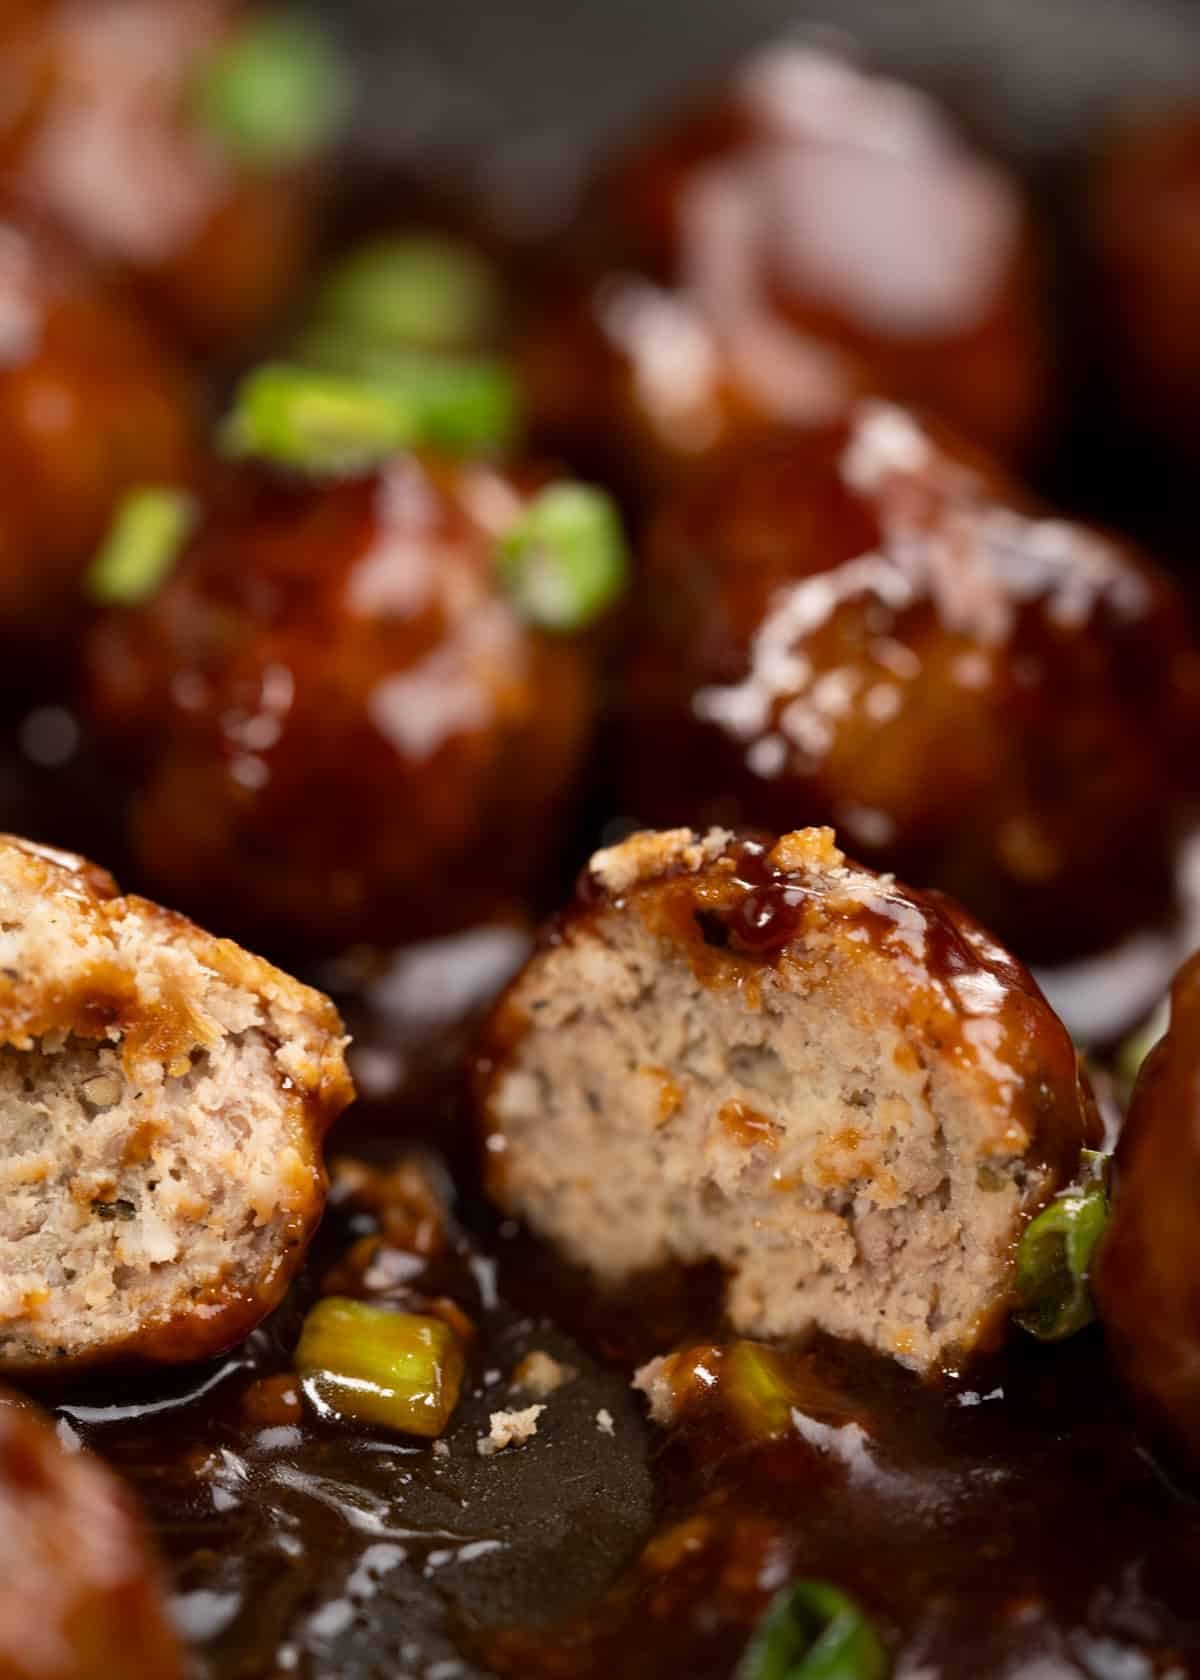 Cross section of sweet and sour meatballs showing how juicy and moist they are. 